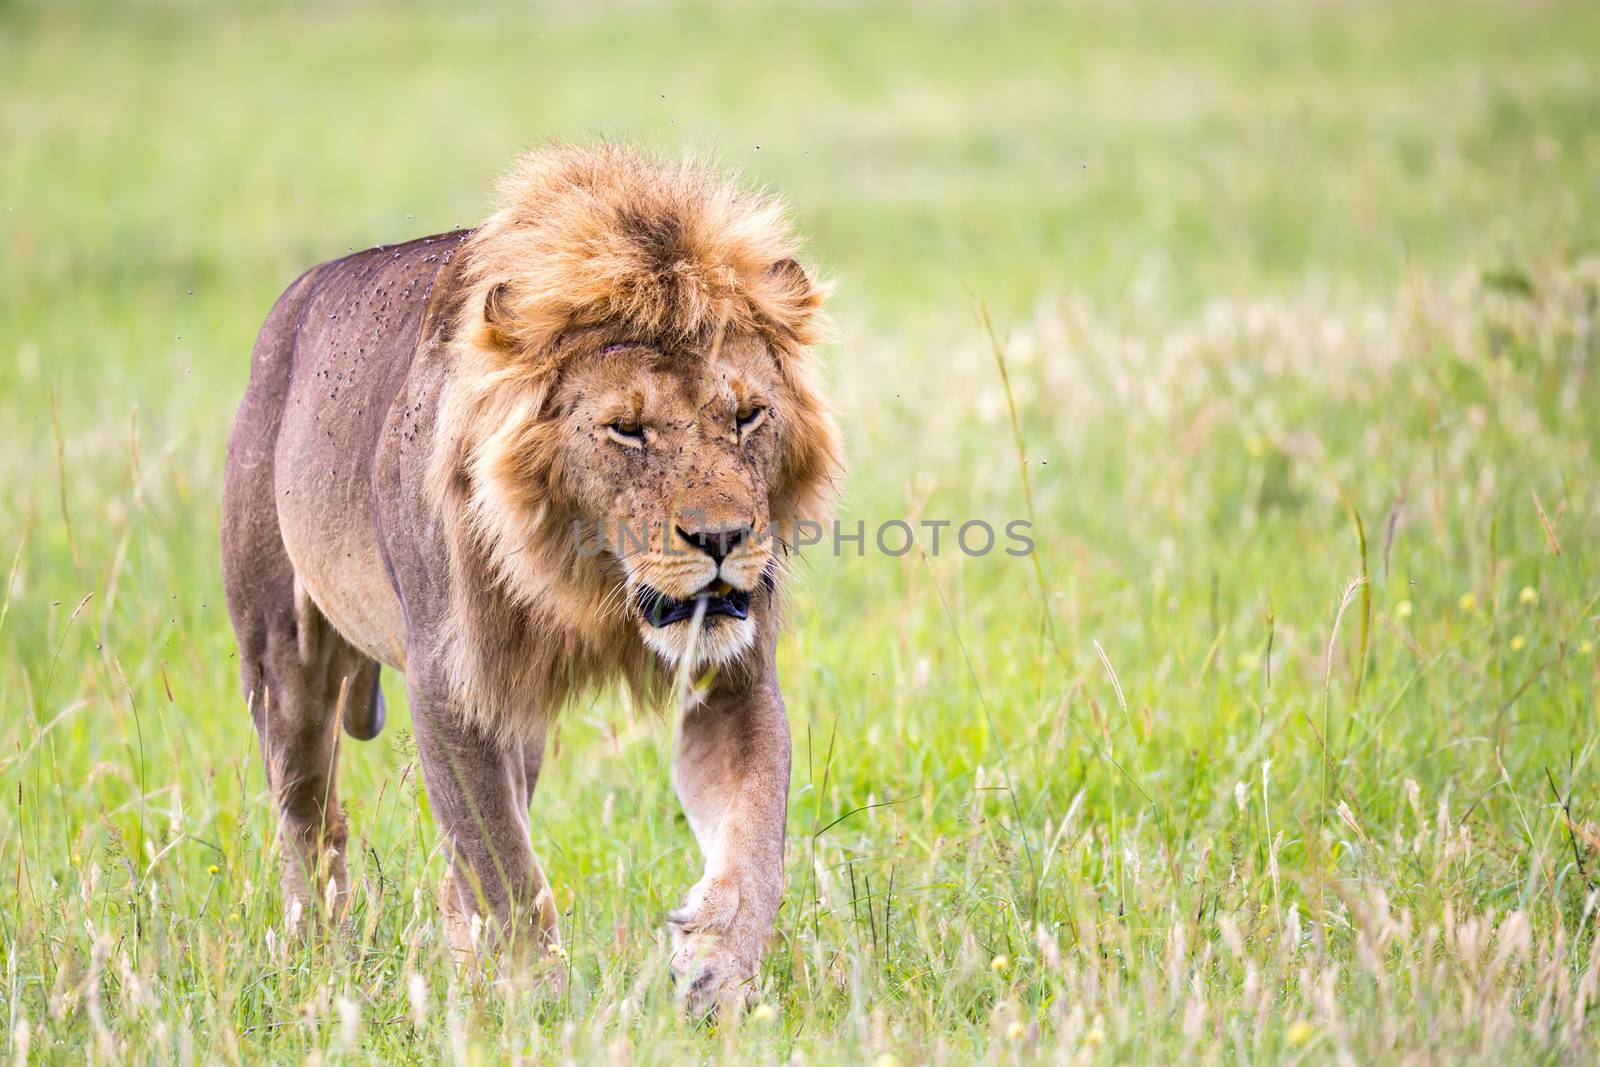 A big male lion is walking in the savannah by 25ehaag6